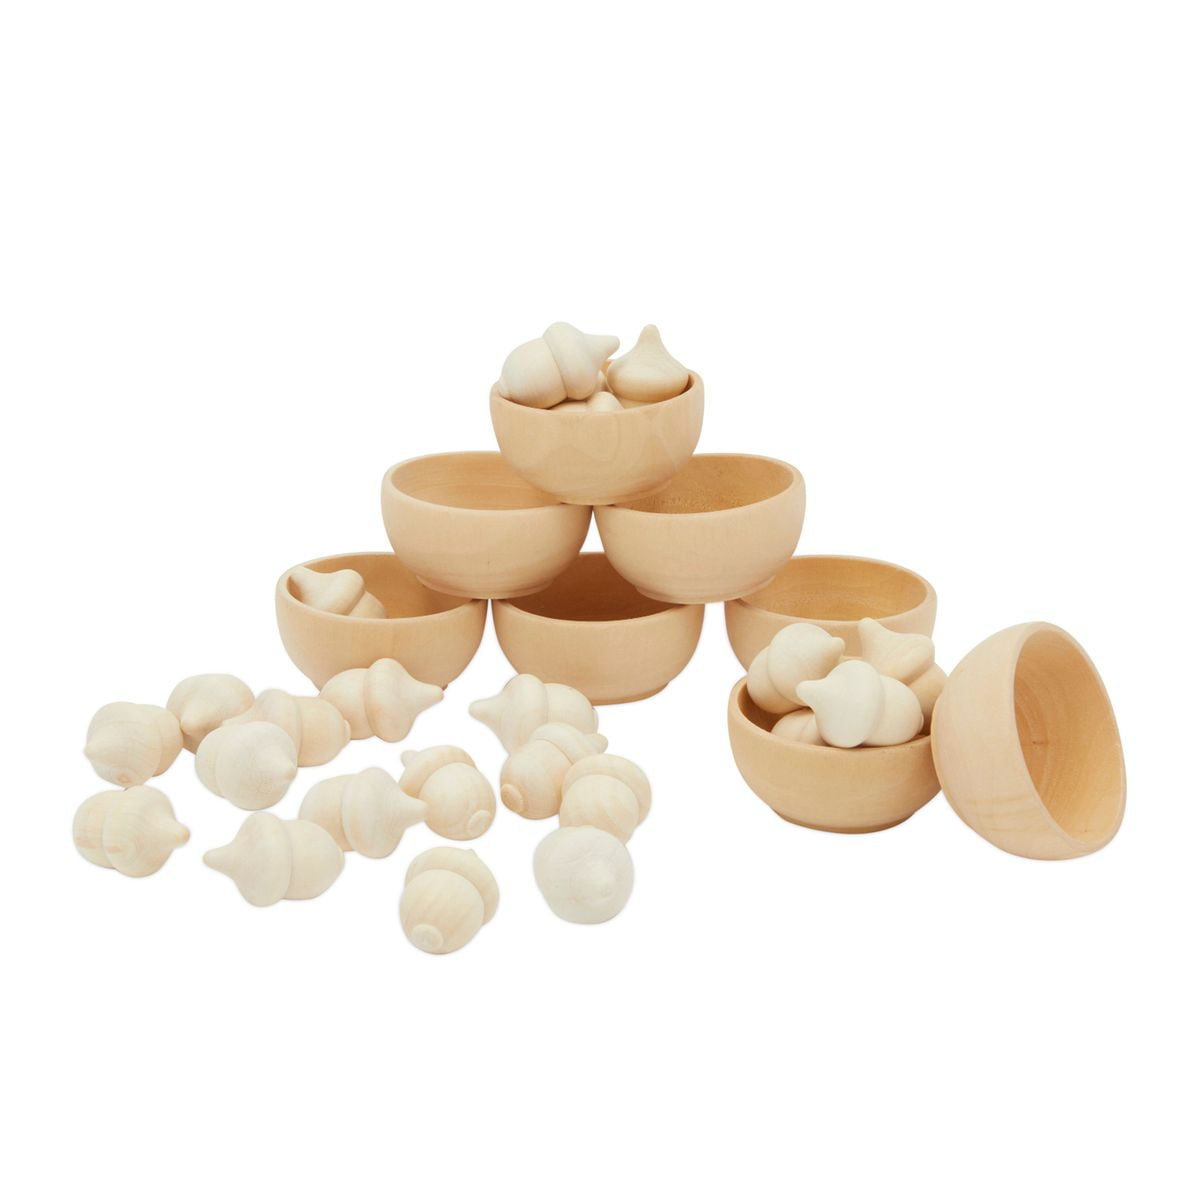 Wooden Acorns Counting & Sorting Kit Unfinished Wood Set of 20 Acorns and 6 Bowls 